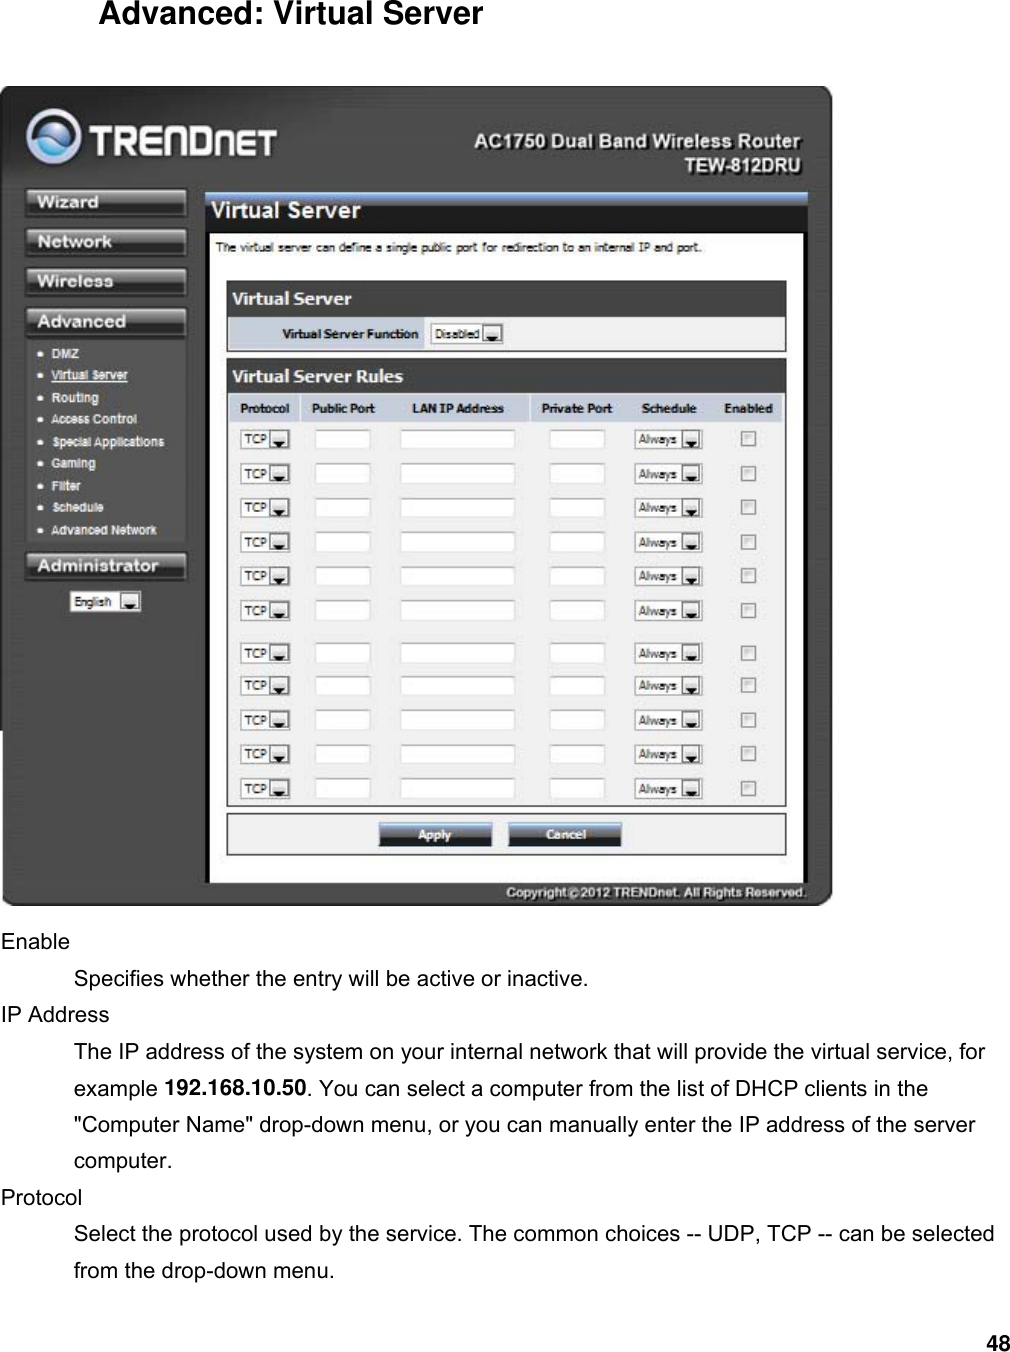 48 Advanced: Virtual Server  Enable  Specifies whether the entry will be active or inactive.   IP Address   The IP address of the system on your internal network that will provide the virtual service, for example 192.168.10.50. You can select a computer from the list of DHCP clients in the &quot;Computer Name&quot; drop-down menu, or you can manually enter the IP address of the server computer.  Protocol  Select the protocol used by the service. The common choices -- UDP, TCP -- can be selected from the drop-down menu.   